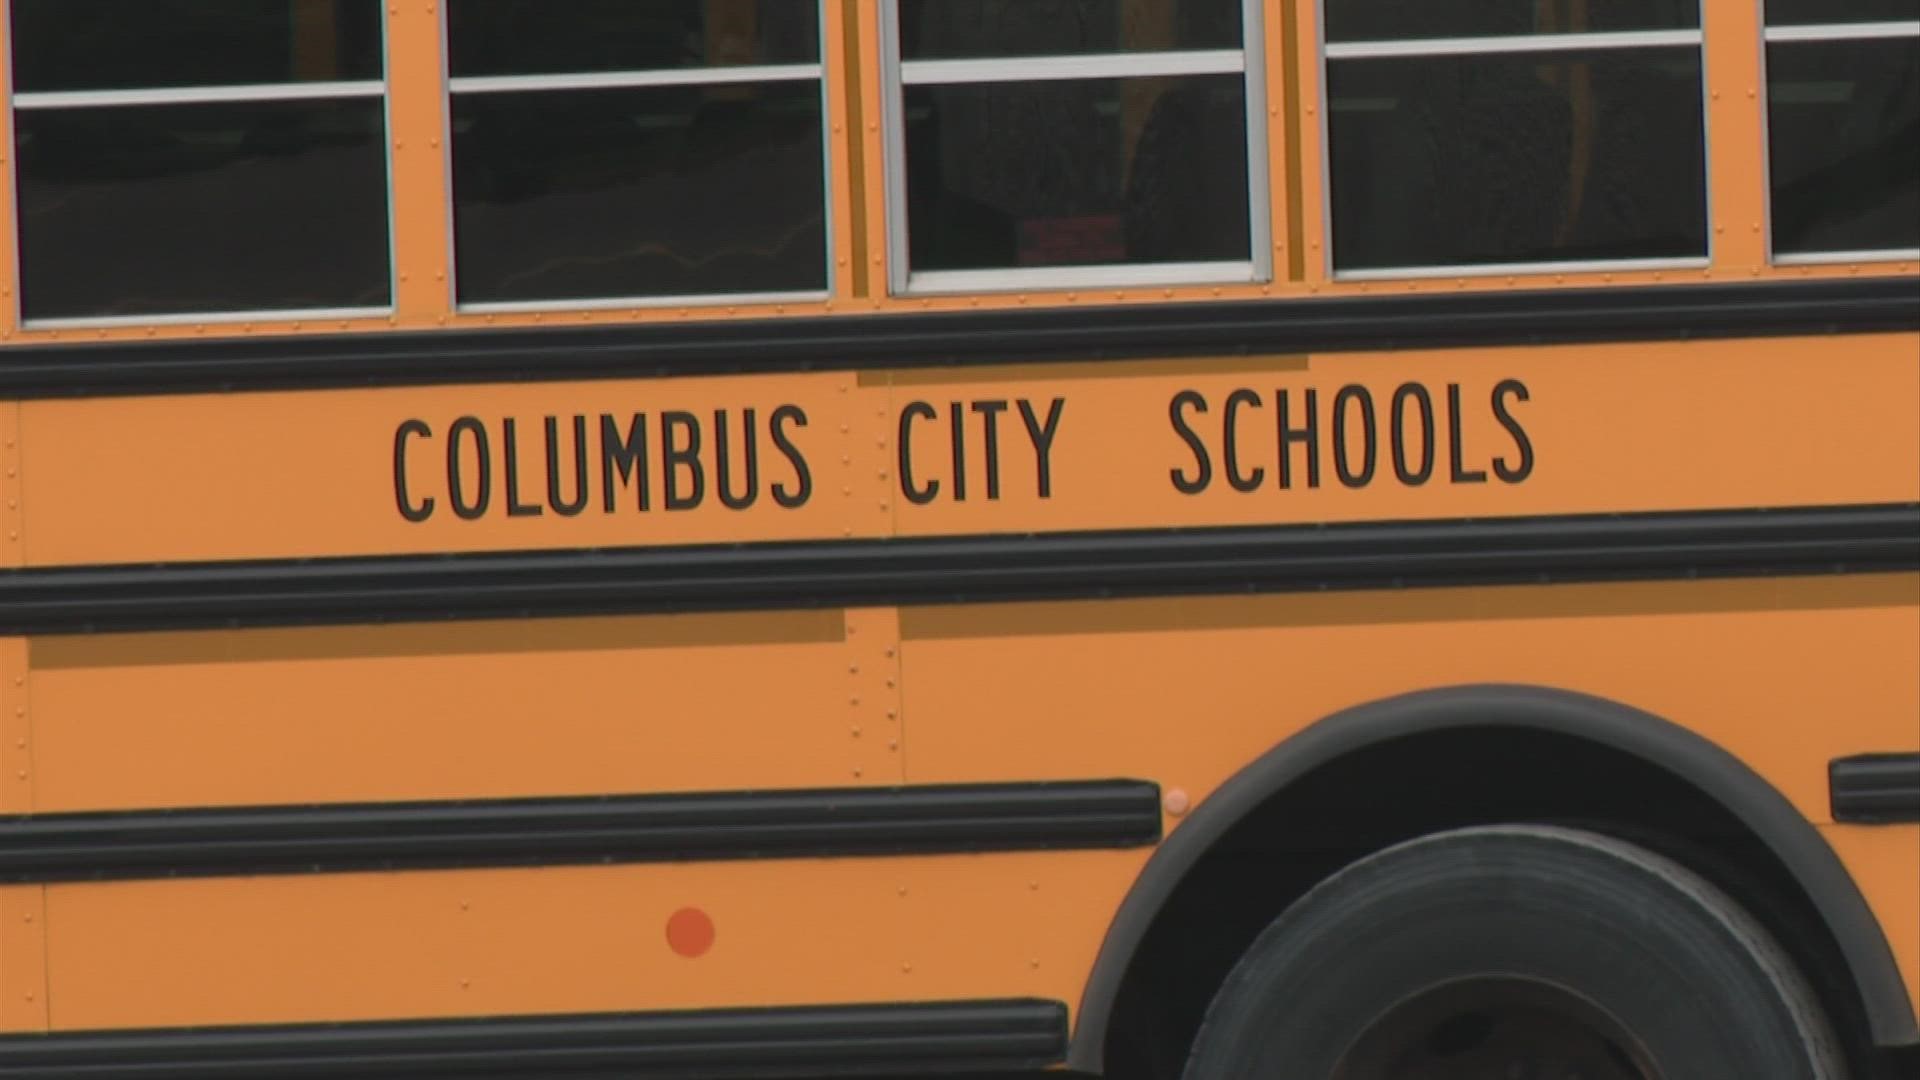 Parents expressed their concerns over continued lack of transportation from Columbus City Schools, while the district works to resolve all issues.